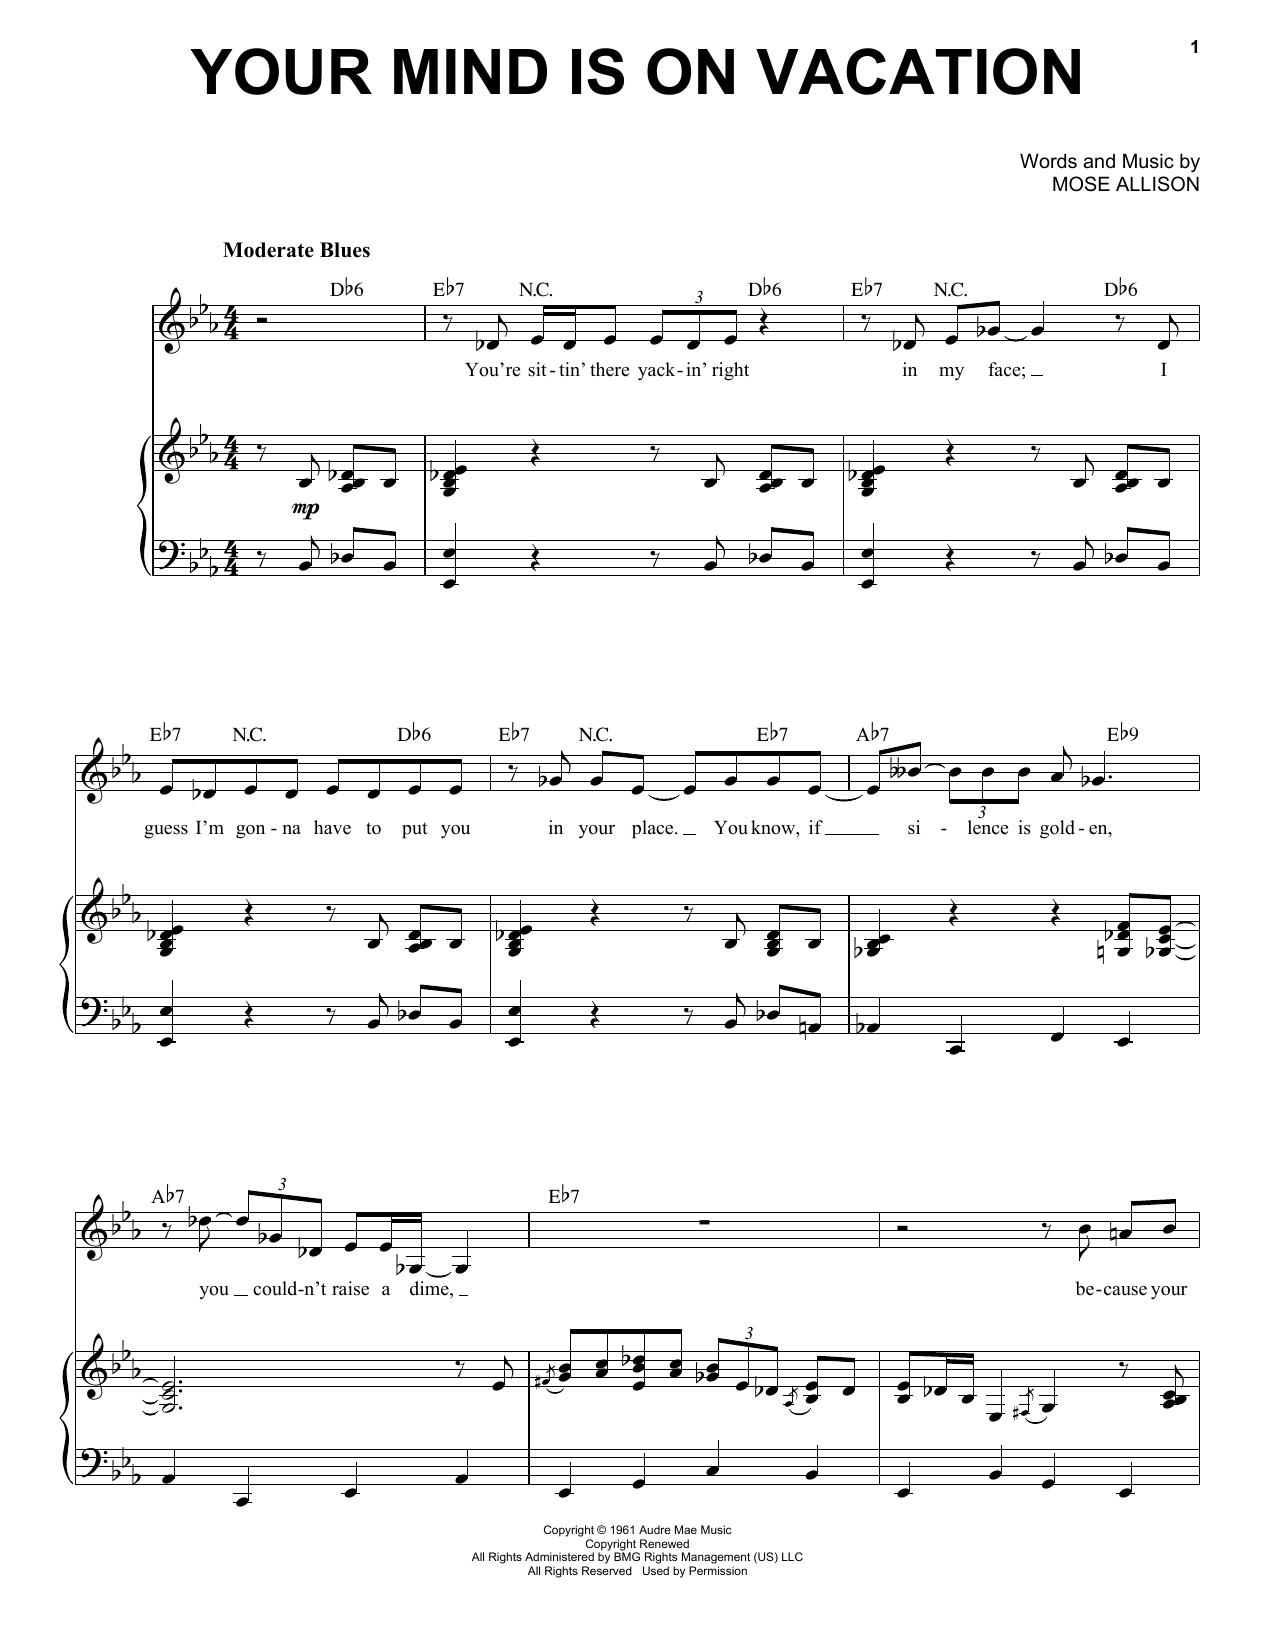 Download Mose Allison Your Mind Is On Vacation Sheet Music